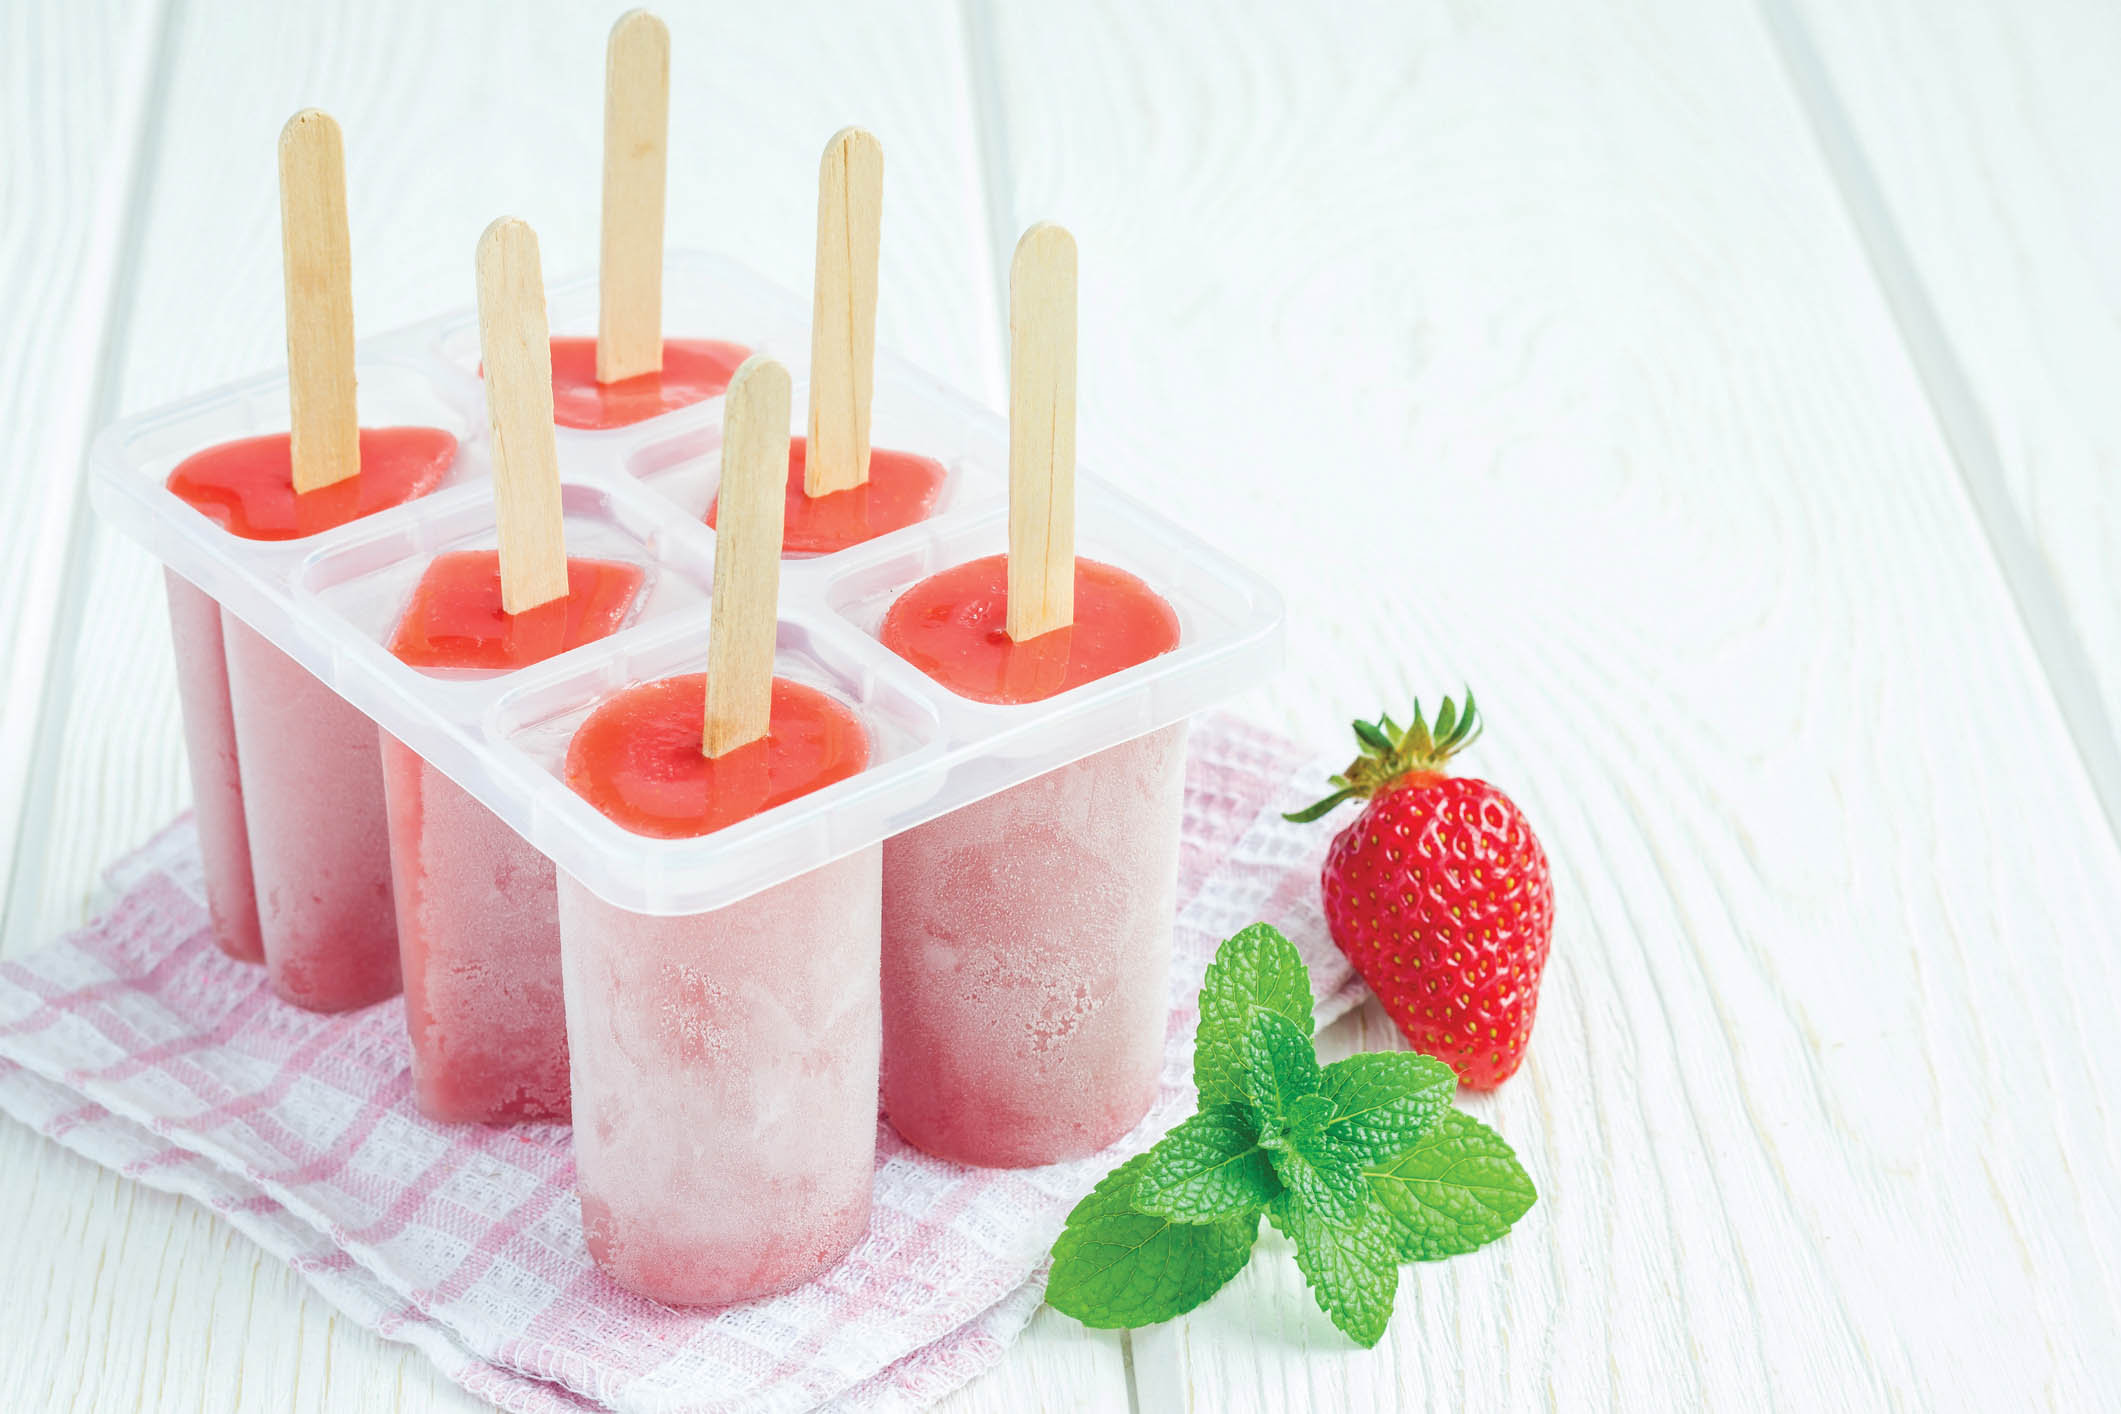 Homemade popsicles with strawberry and banana, copy space.